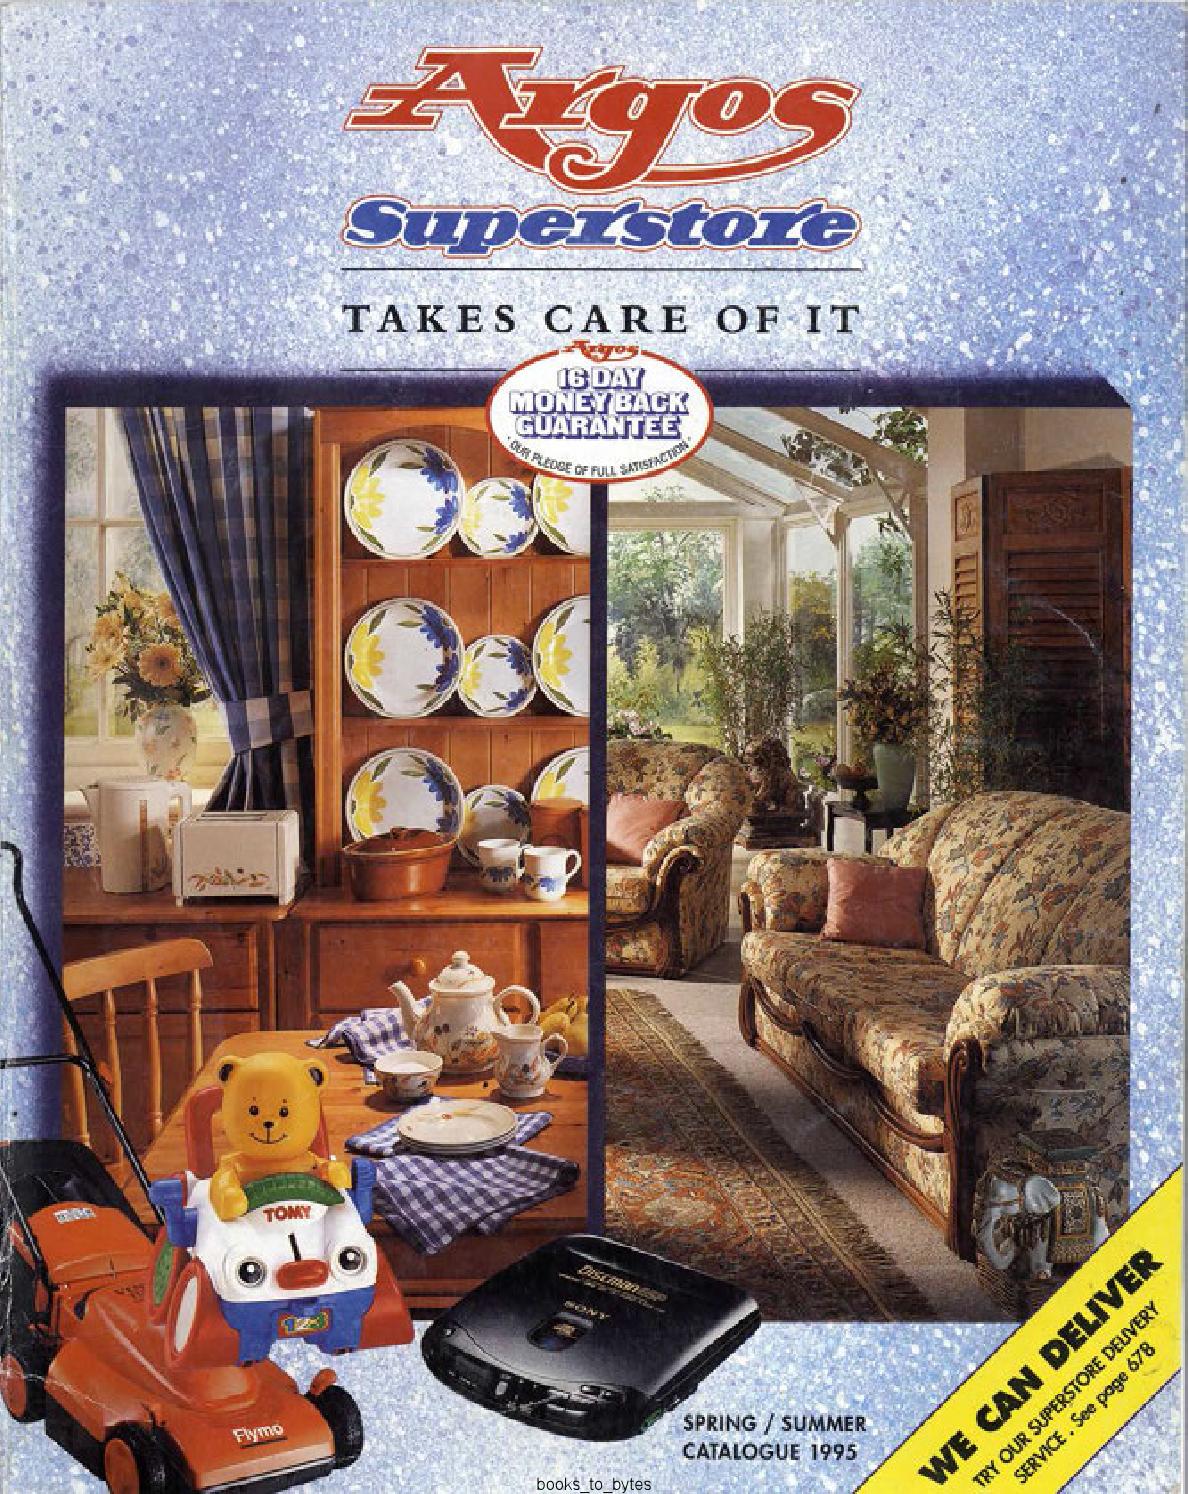 Heat &amp;amp; Glo Fireplace Awesome Argos Superstore 1995 Spring Summer by Retromash issuu